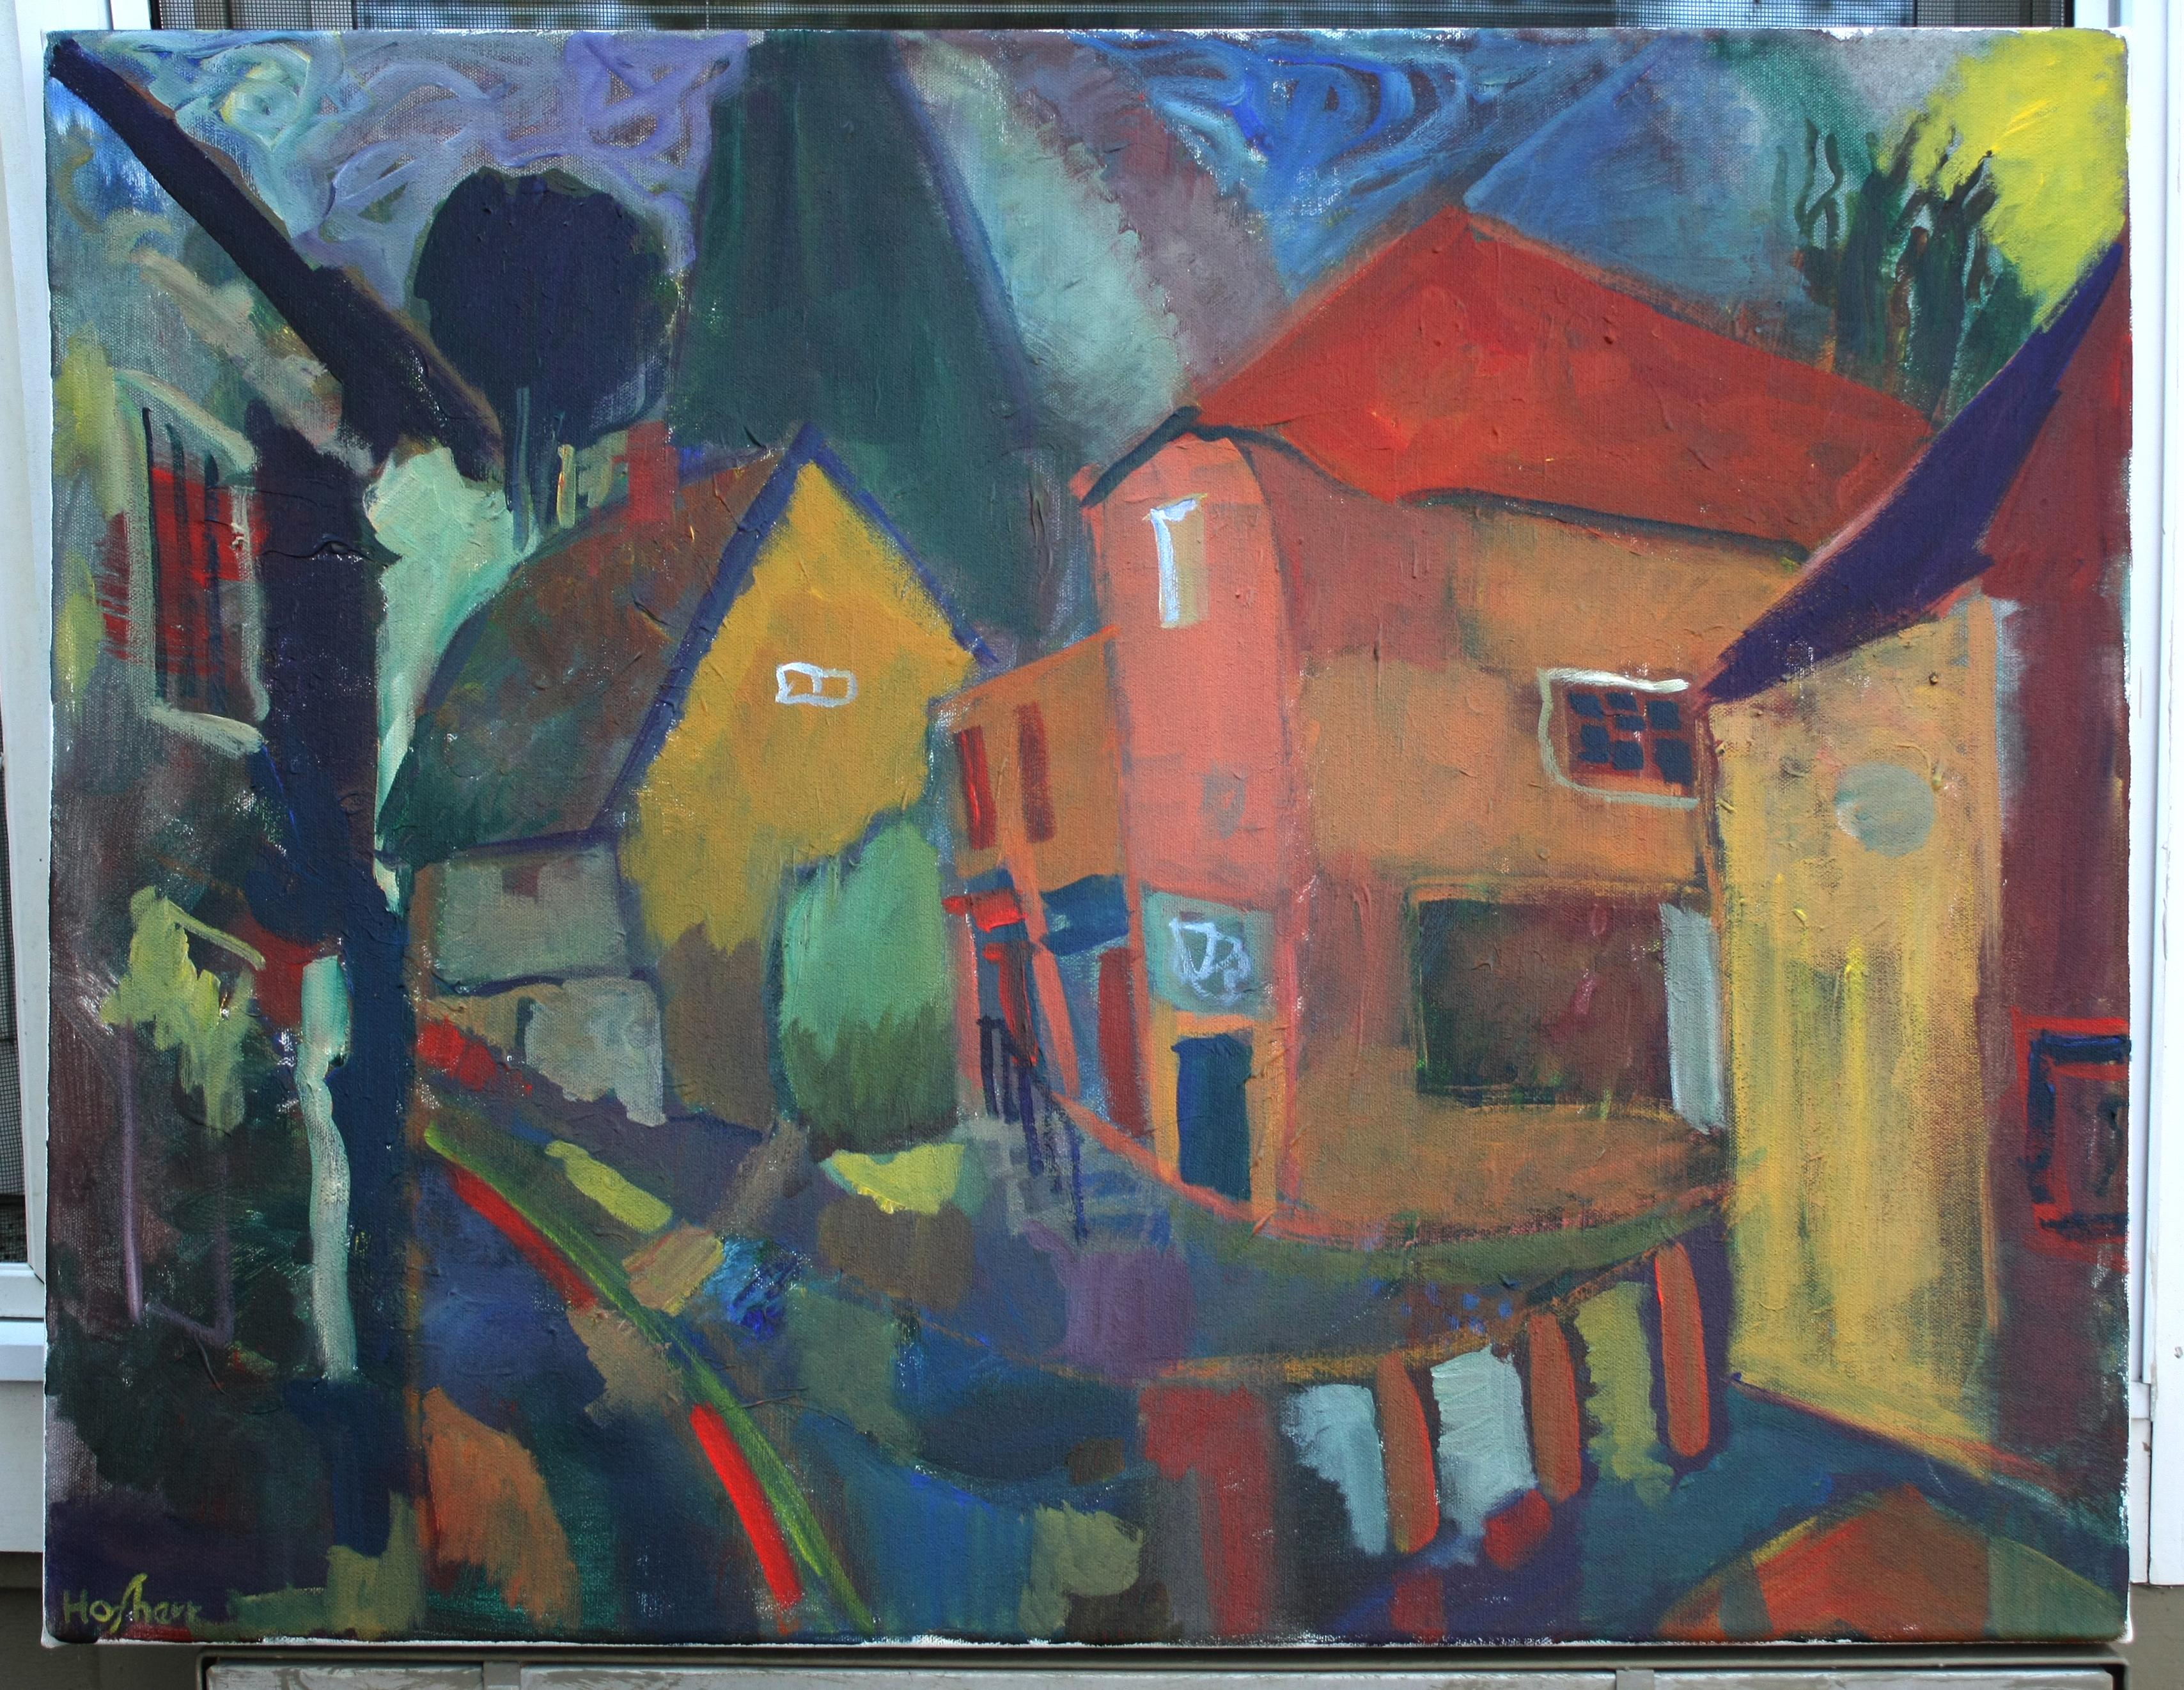 <p>Artist Comments<br>This piece depicts a Fauvist interpretation of a small town through the bold colors, textures, and simplified rendering of its streets and retail stores. The palette creates an engaging arrangement, while the shifted